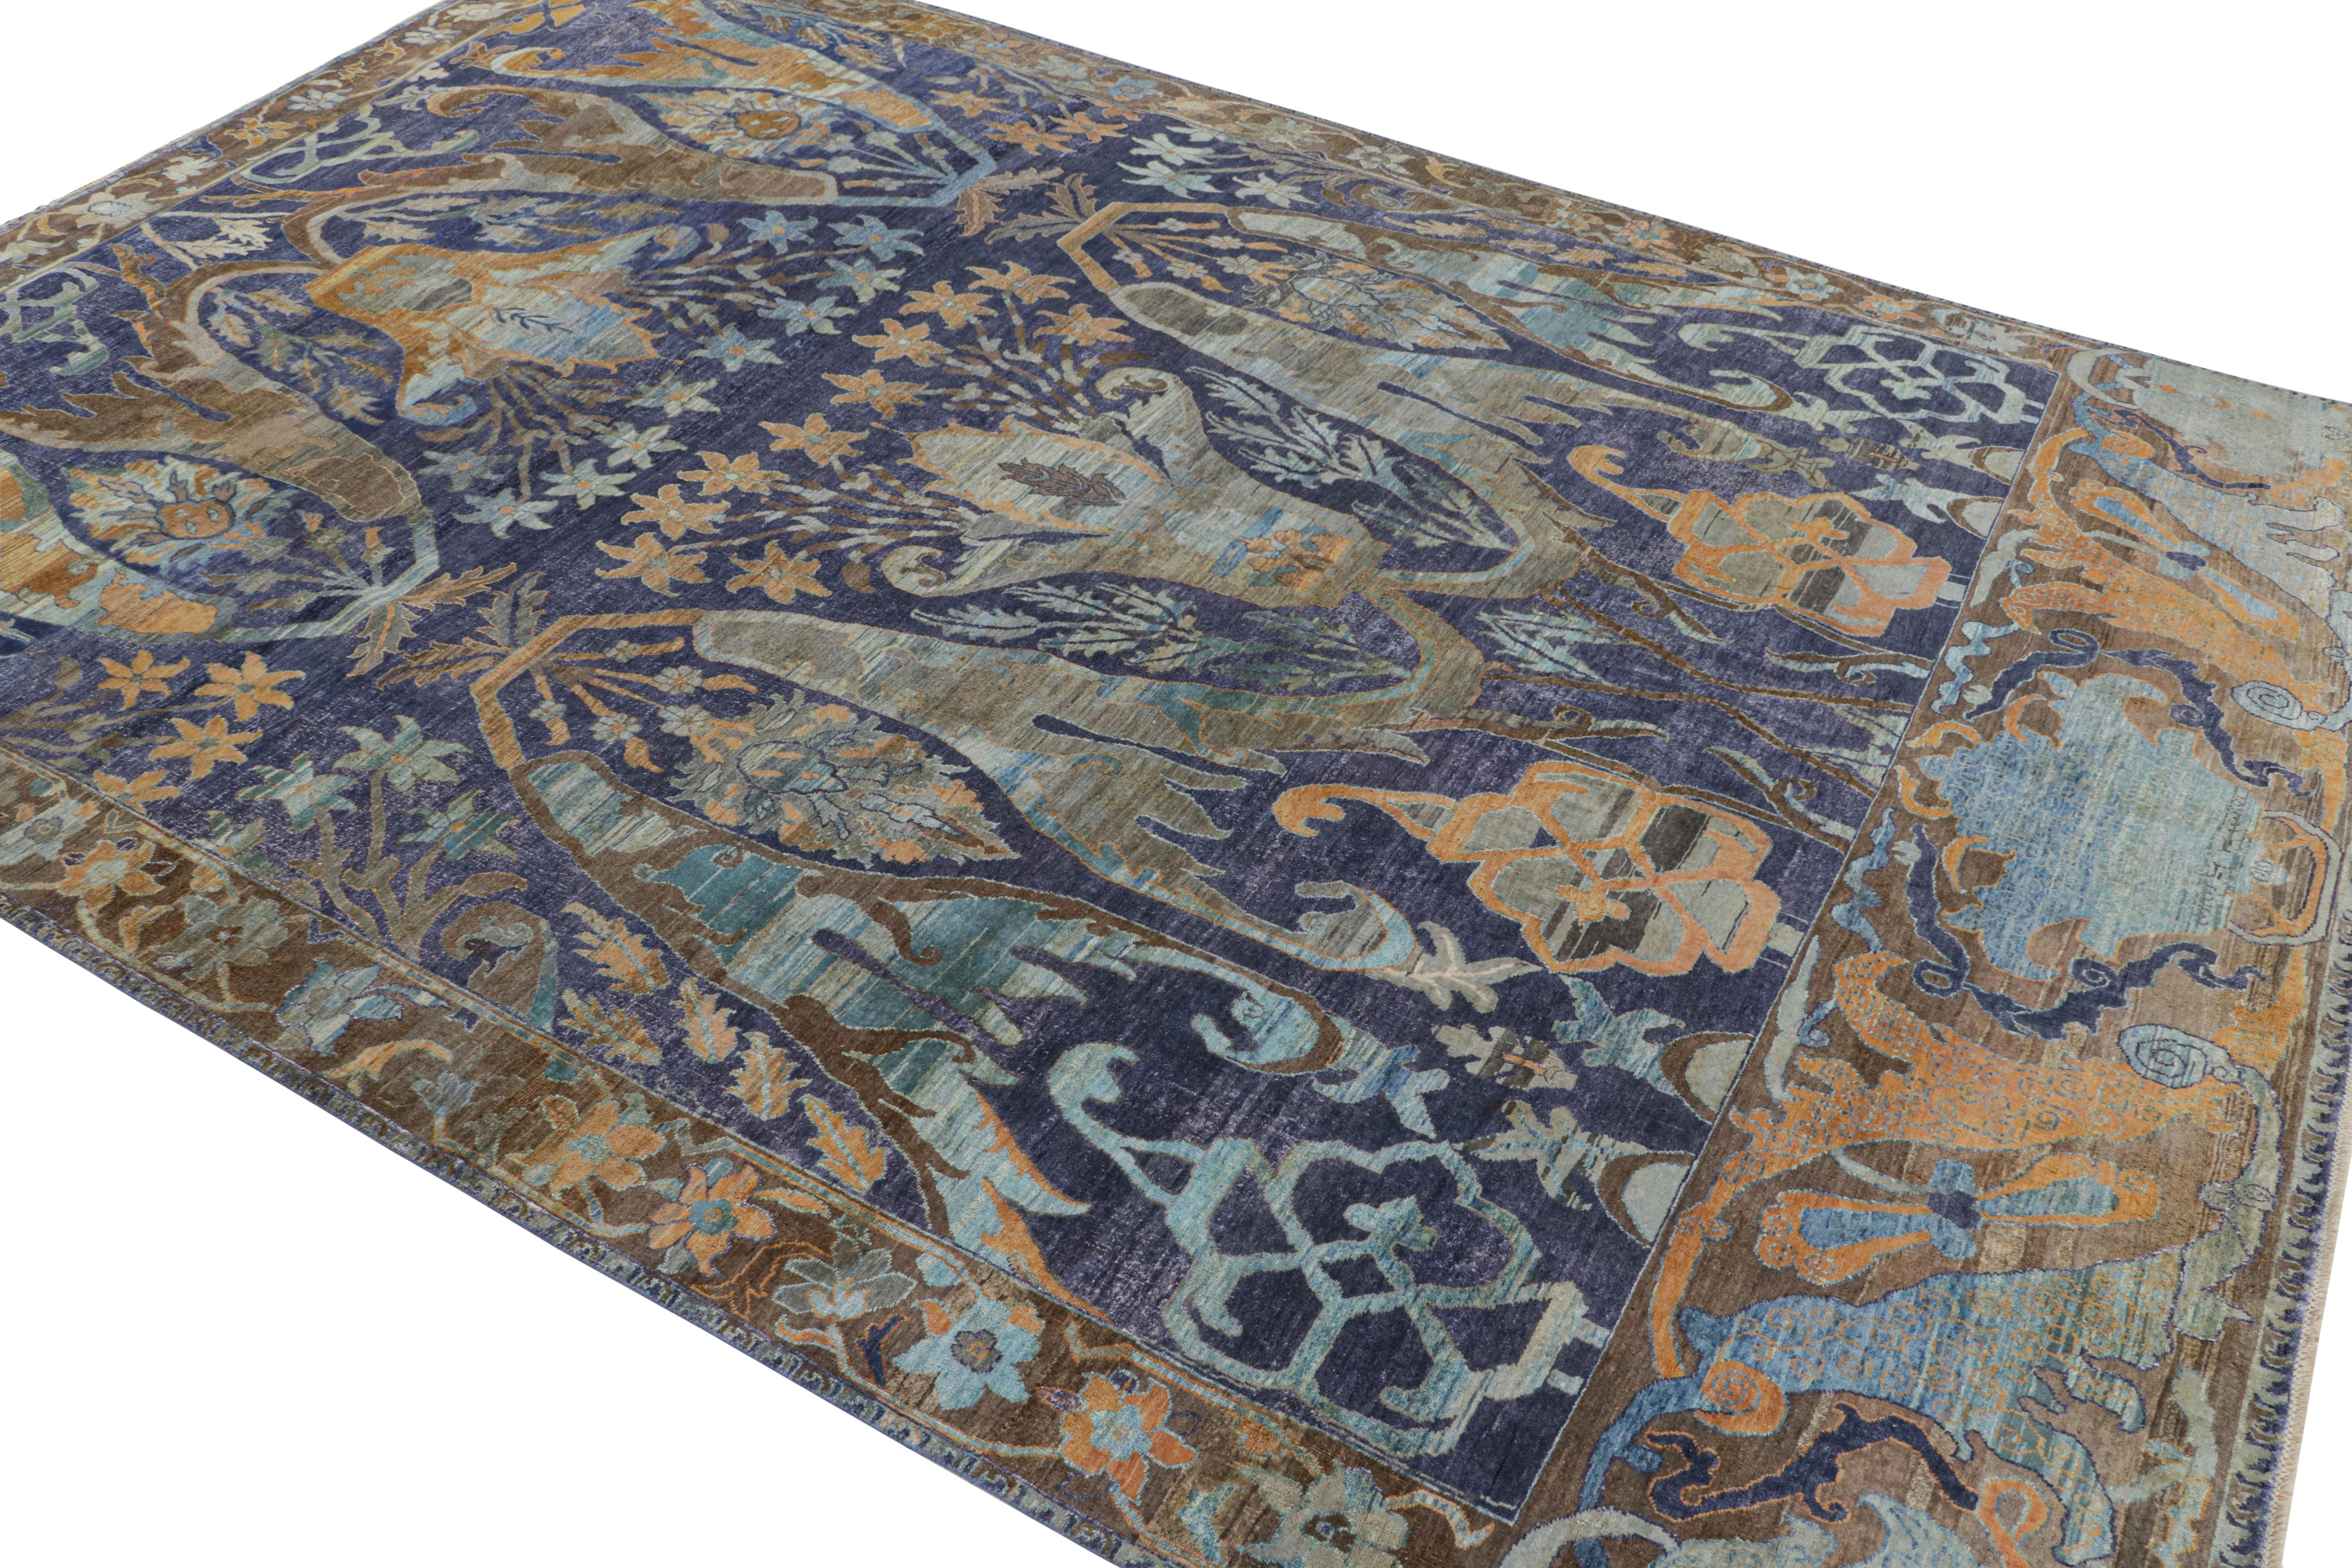 Hand-Knotted Rug & Kilim’s Oushak-Style Rug in Indigo, Brown and Brown Floral Patterns For Sale